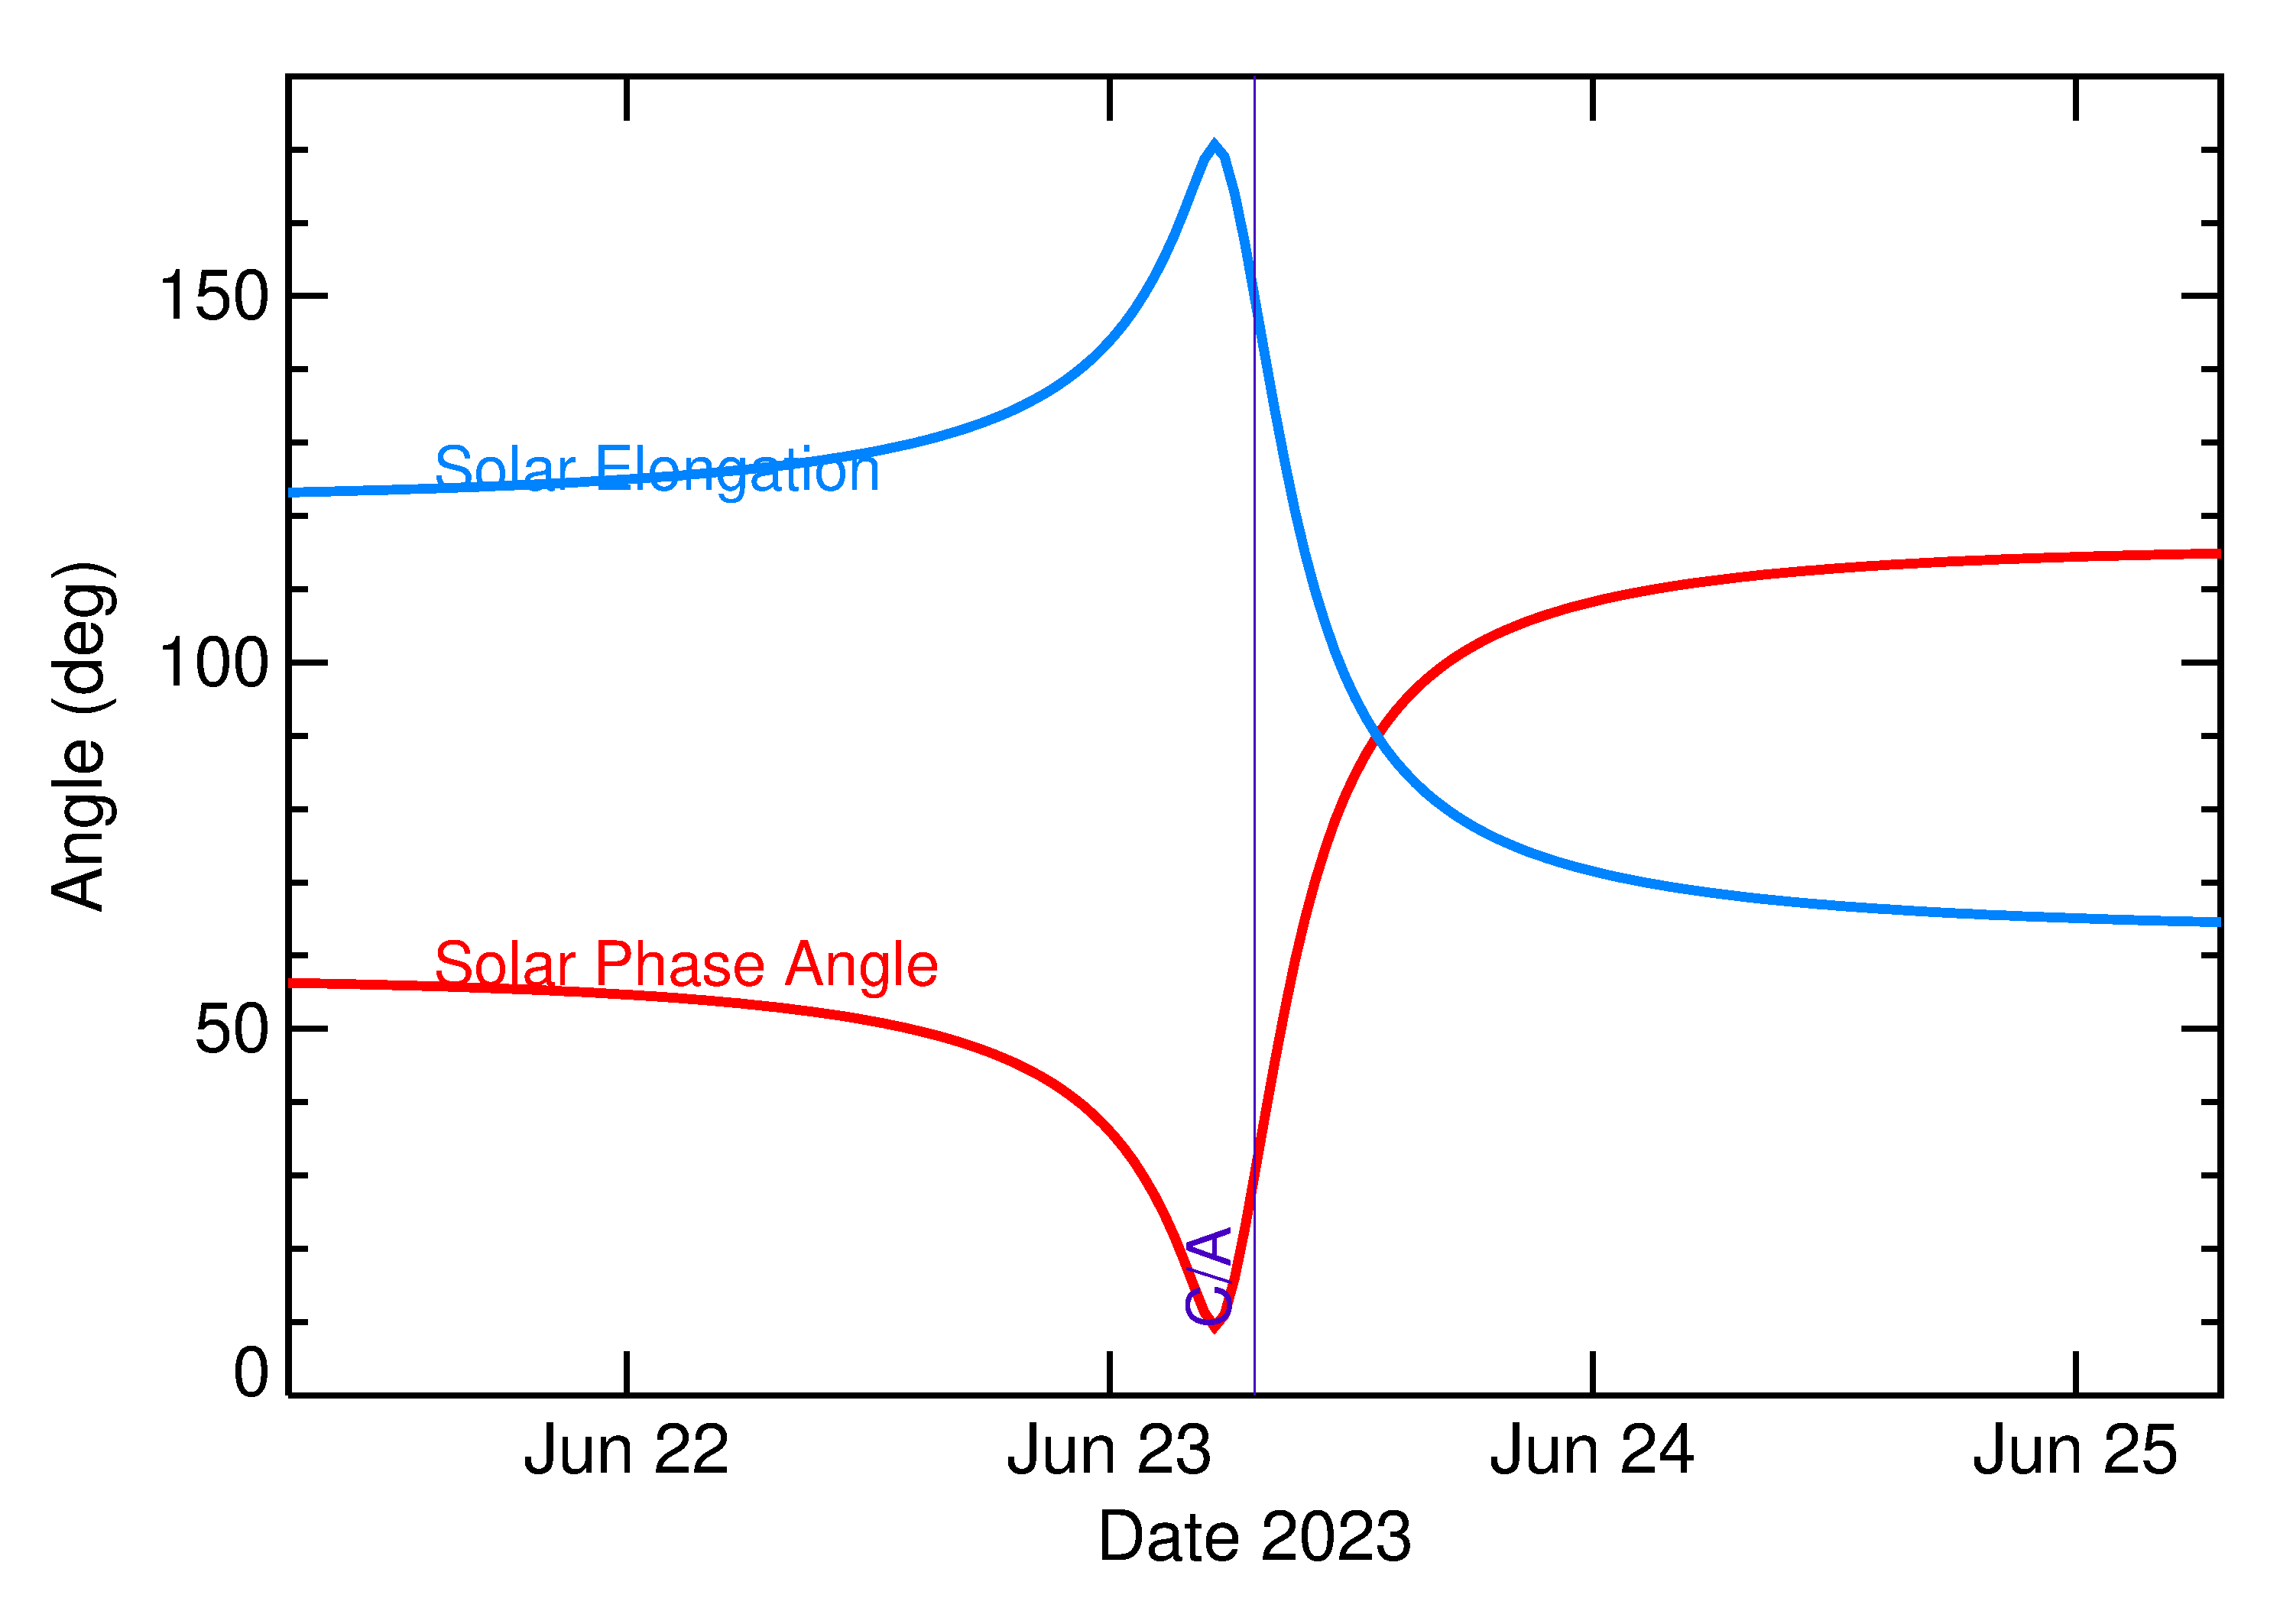 Solar Elongation and Solar Phase Angle of 2023 MW2 in the days around closest approach